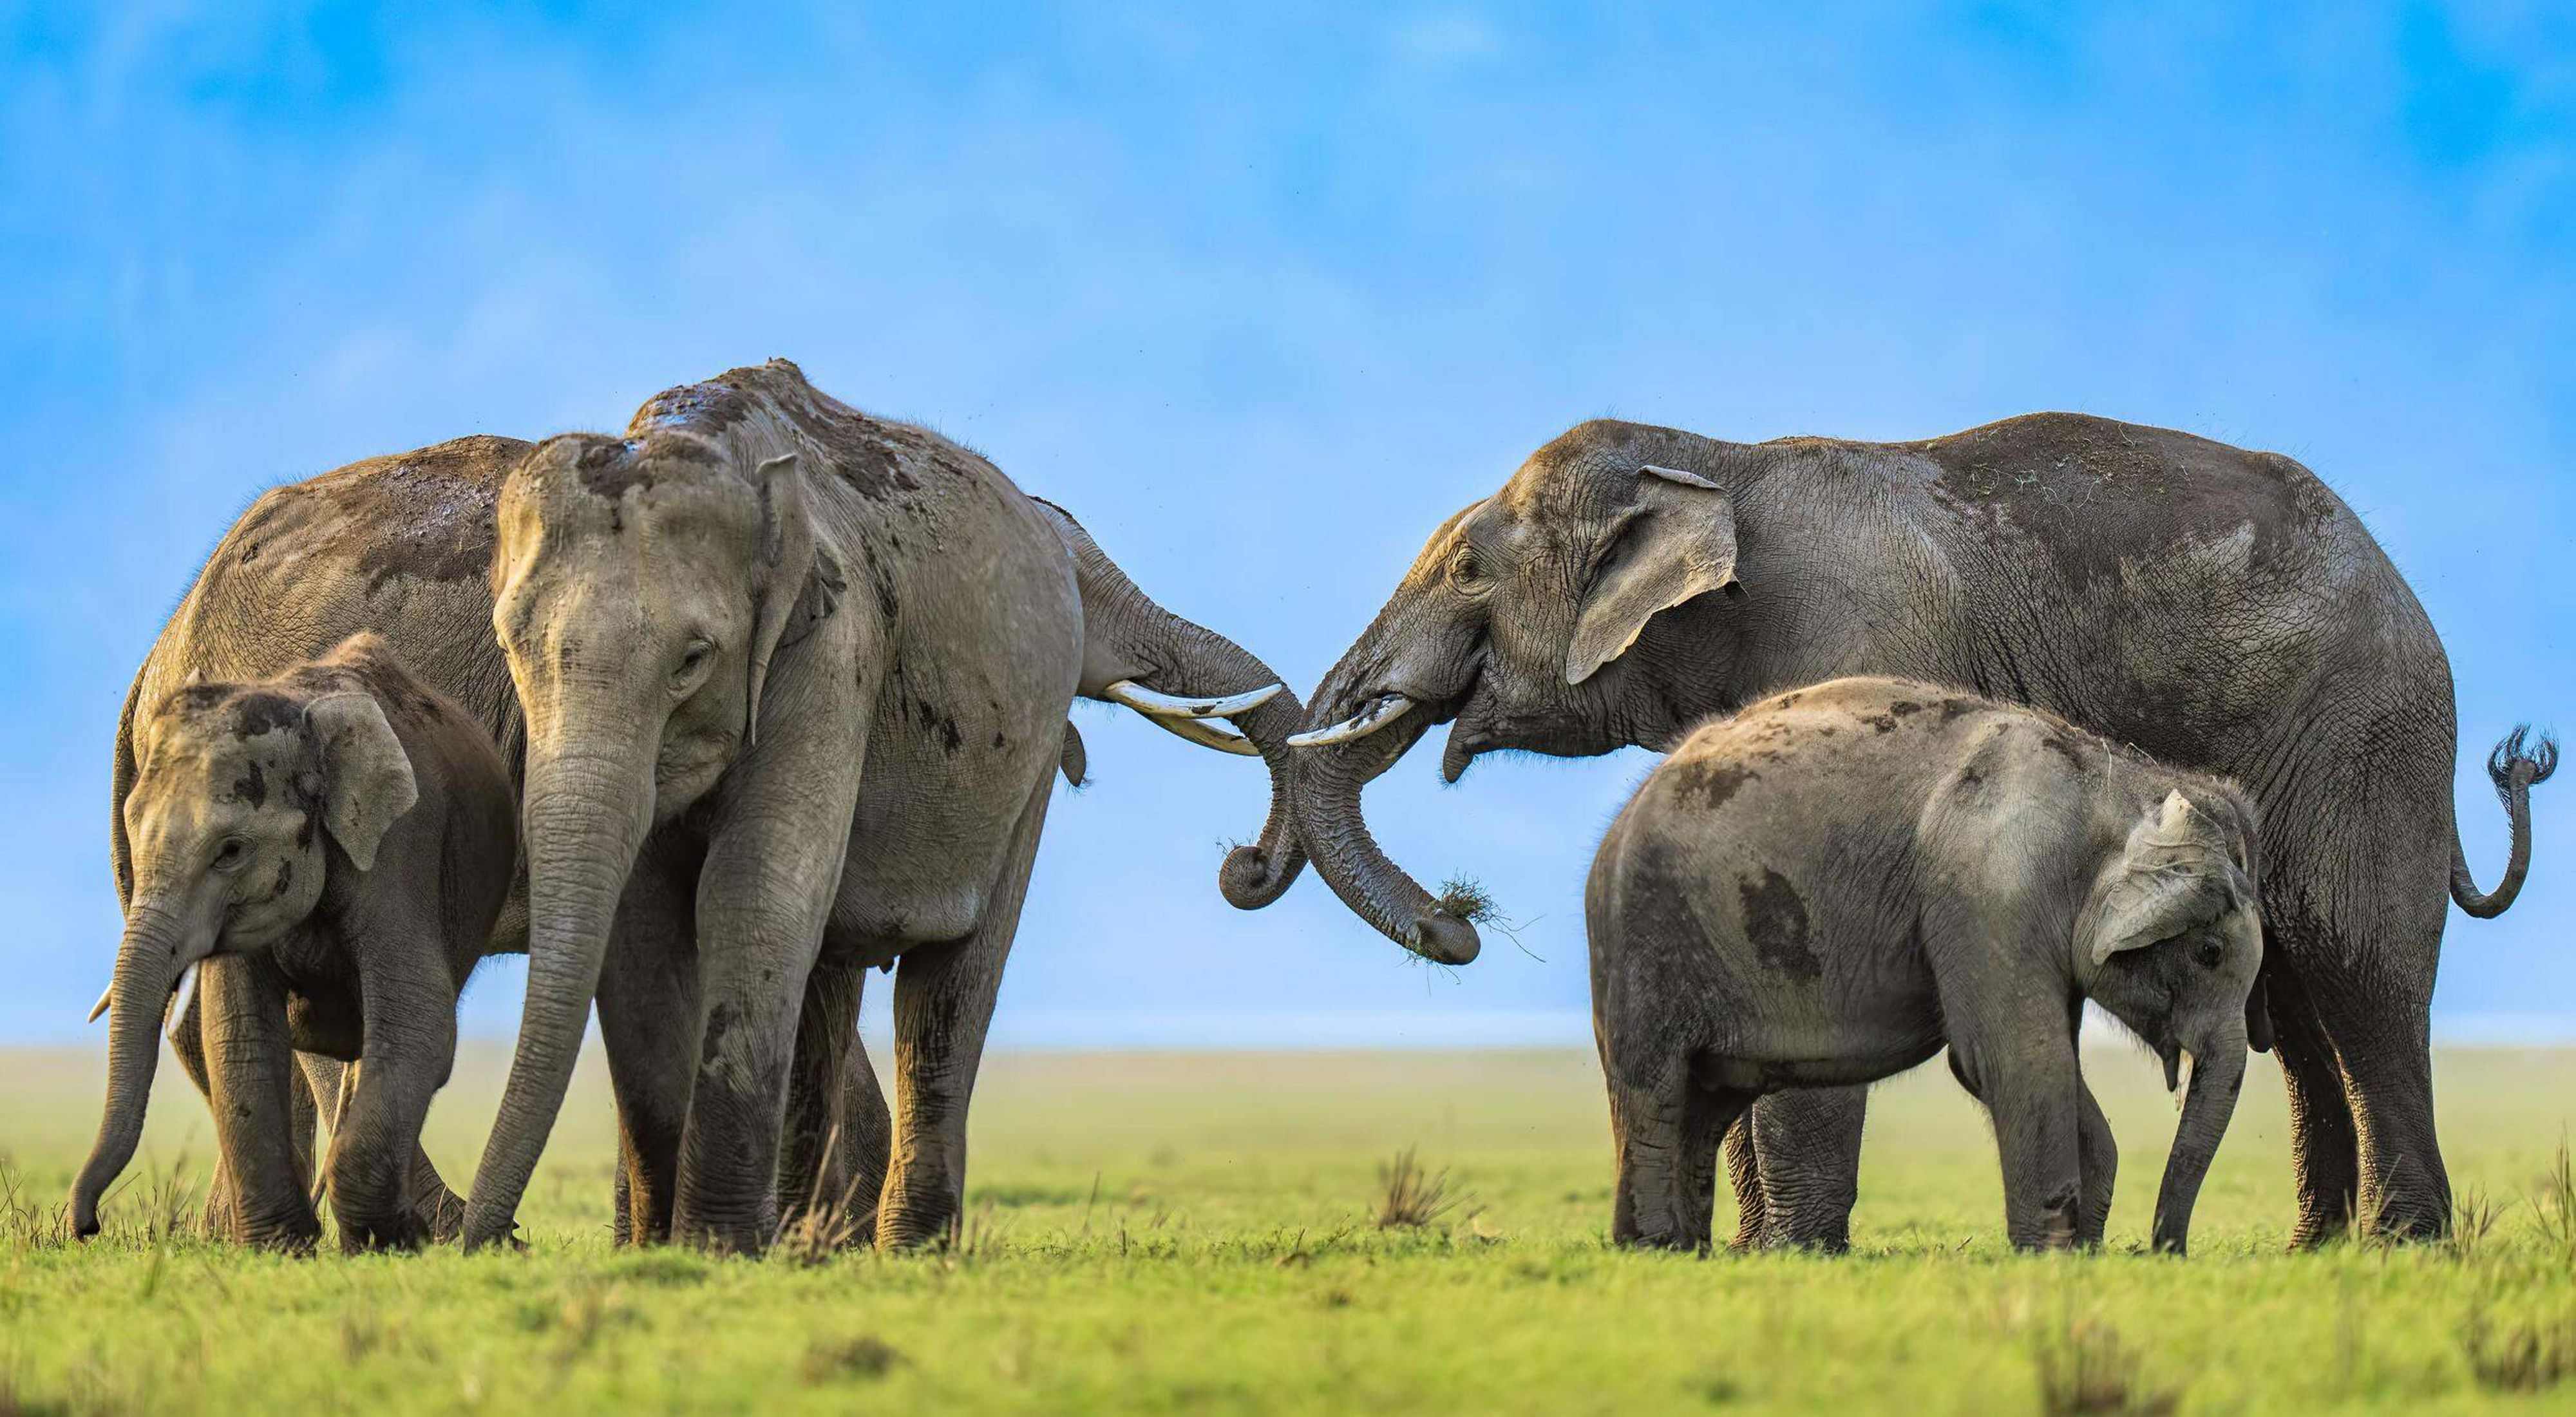 5 elephants interact on a grassy plain, with 2 adult elephants linking their trunks.